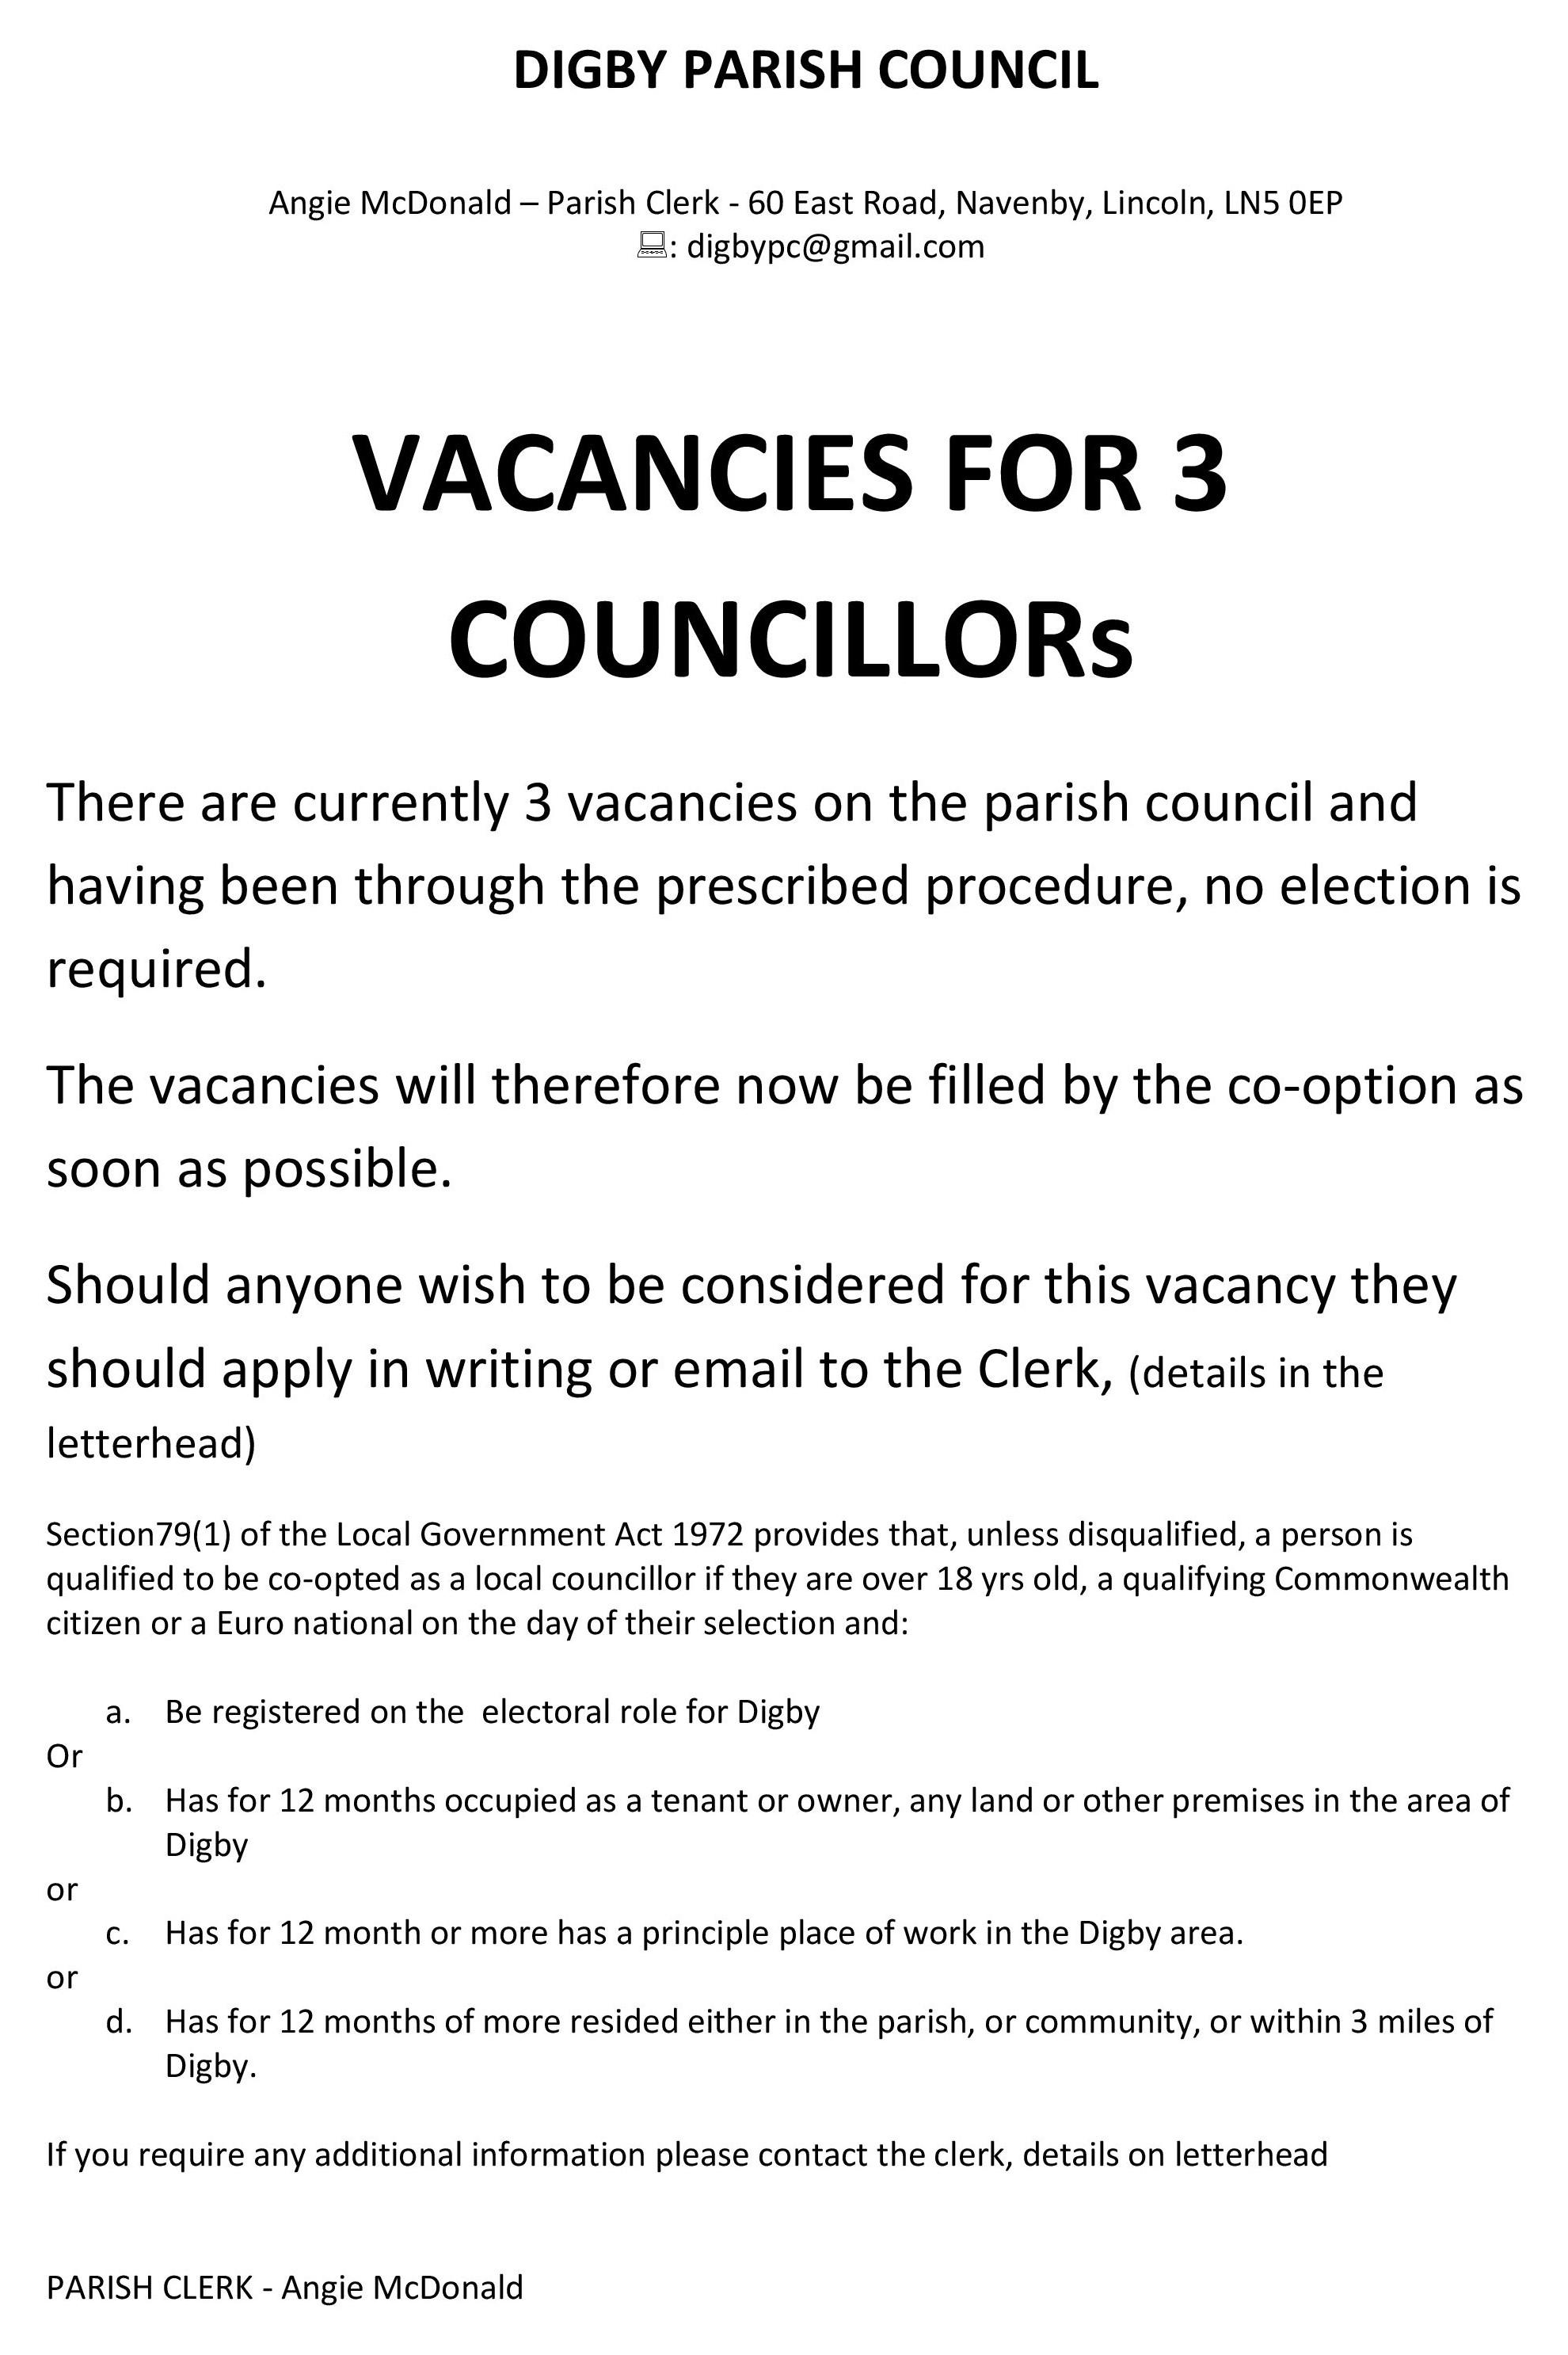 Vacancy co option poster mar 24